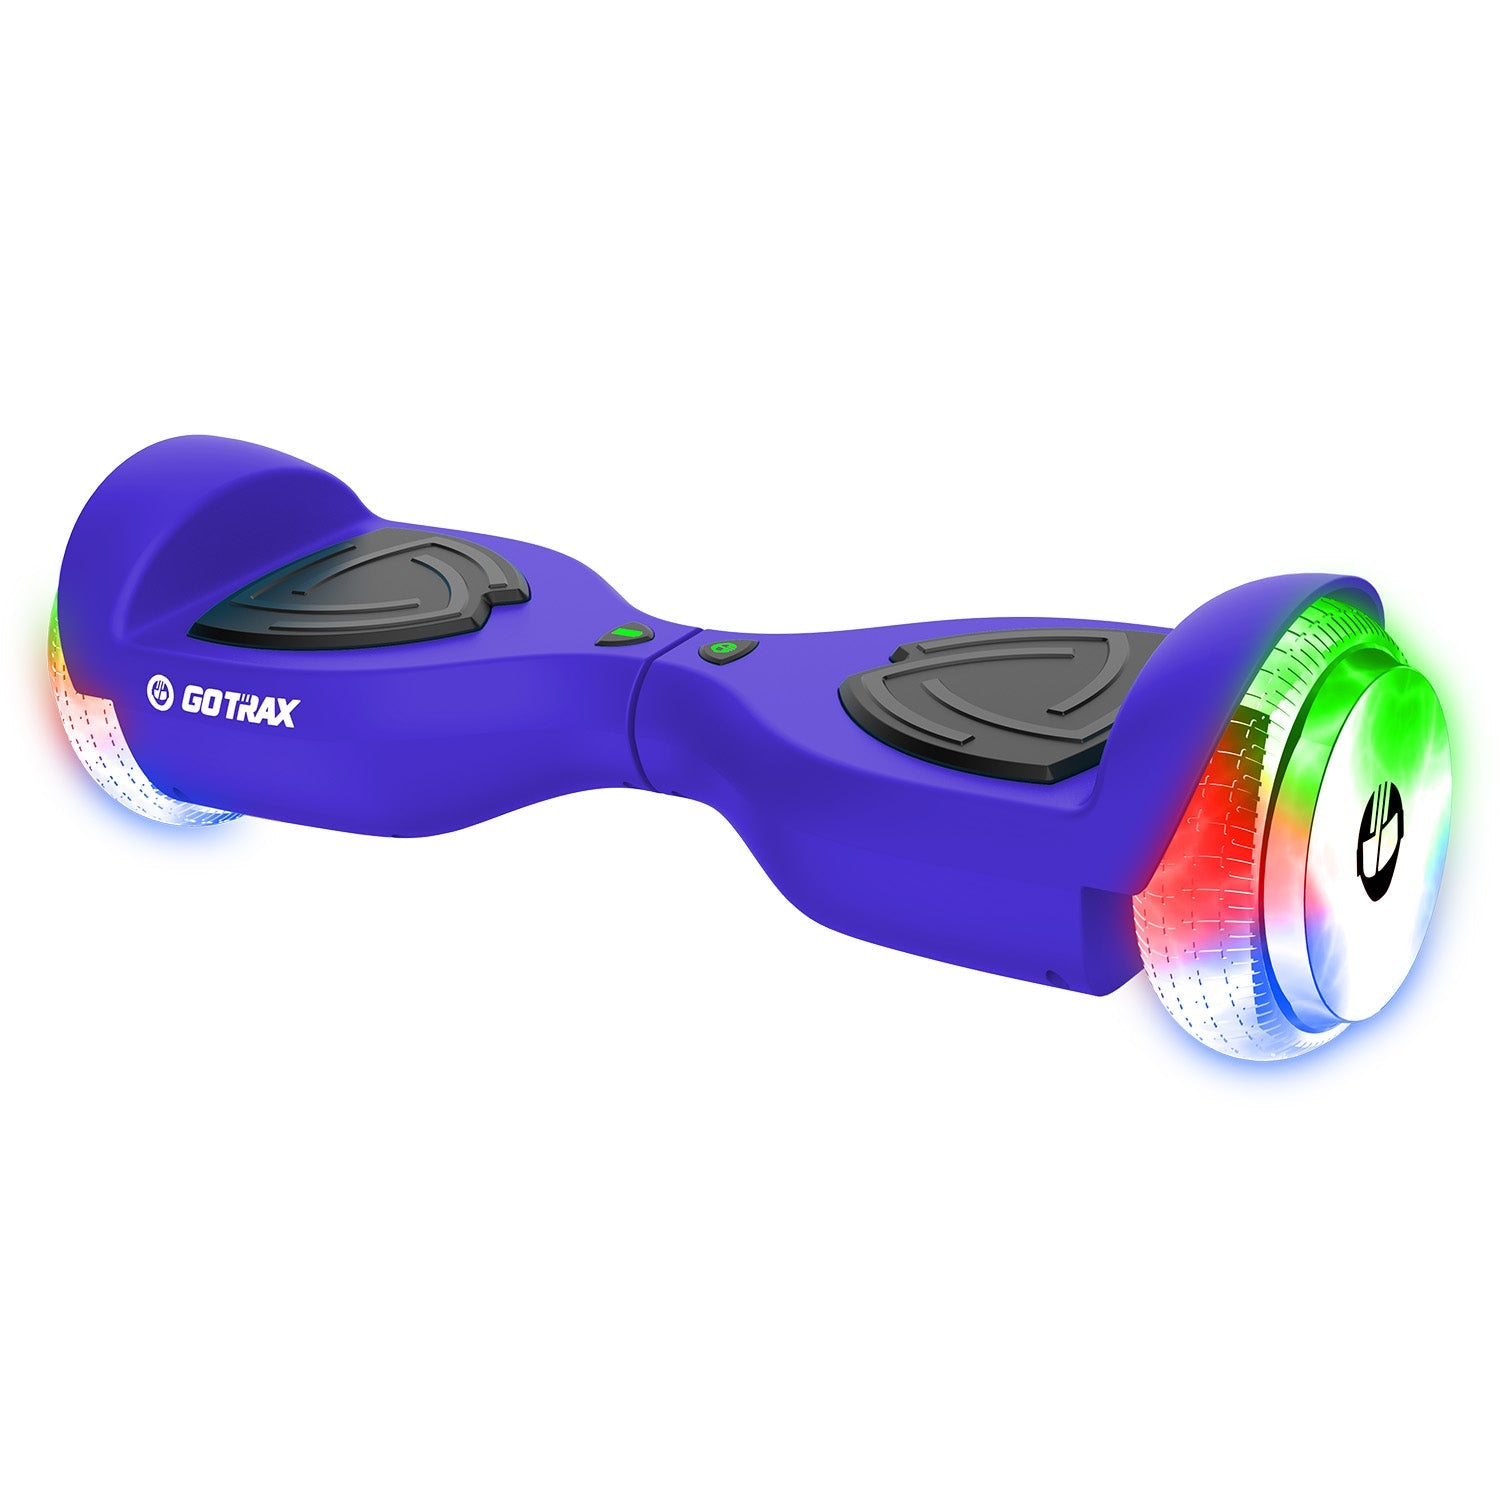 Drift Pro Hoverboard with 6.3" LED Wheels - GOTRAX